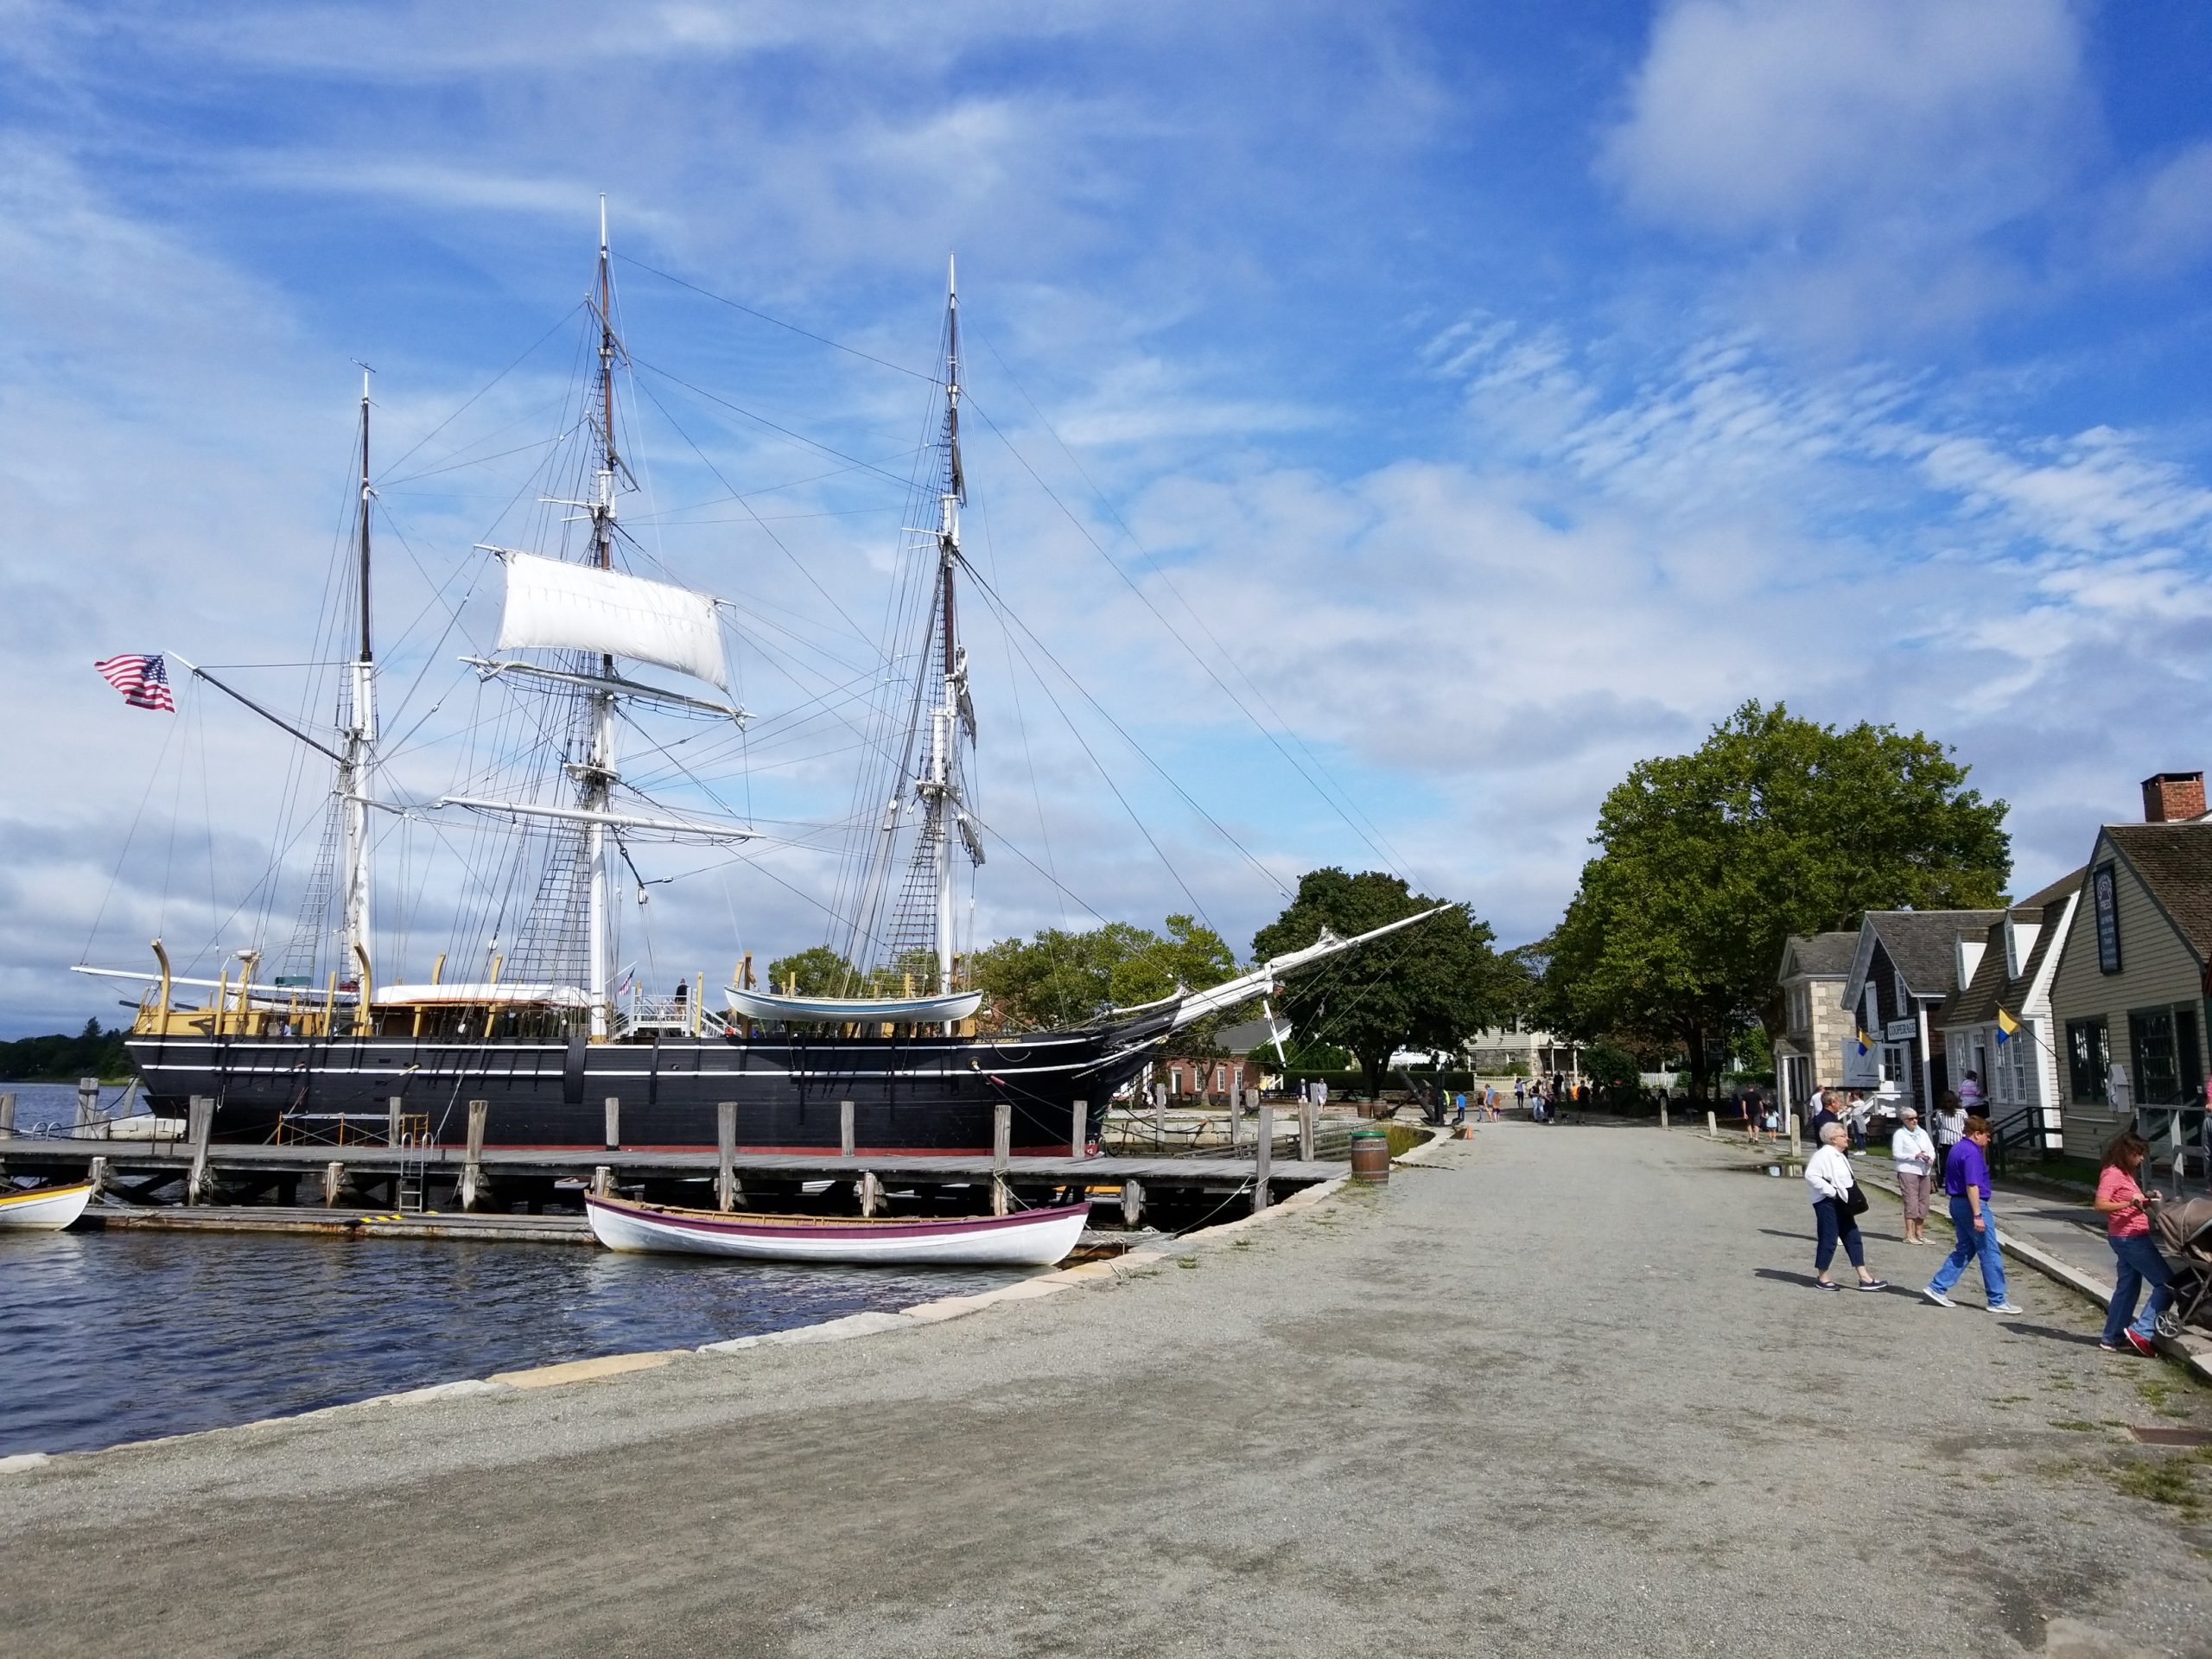 View of the historic Charles Morgan Whaleship docked at the Mystic Seaport Museum - a view included in Old Time Mystic Tour.